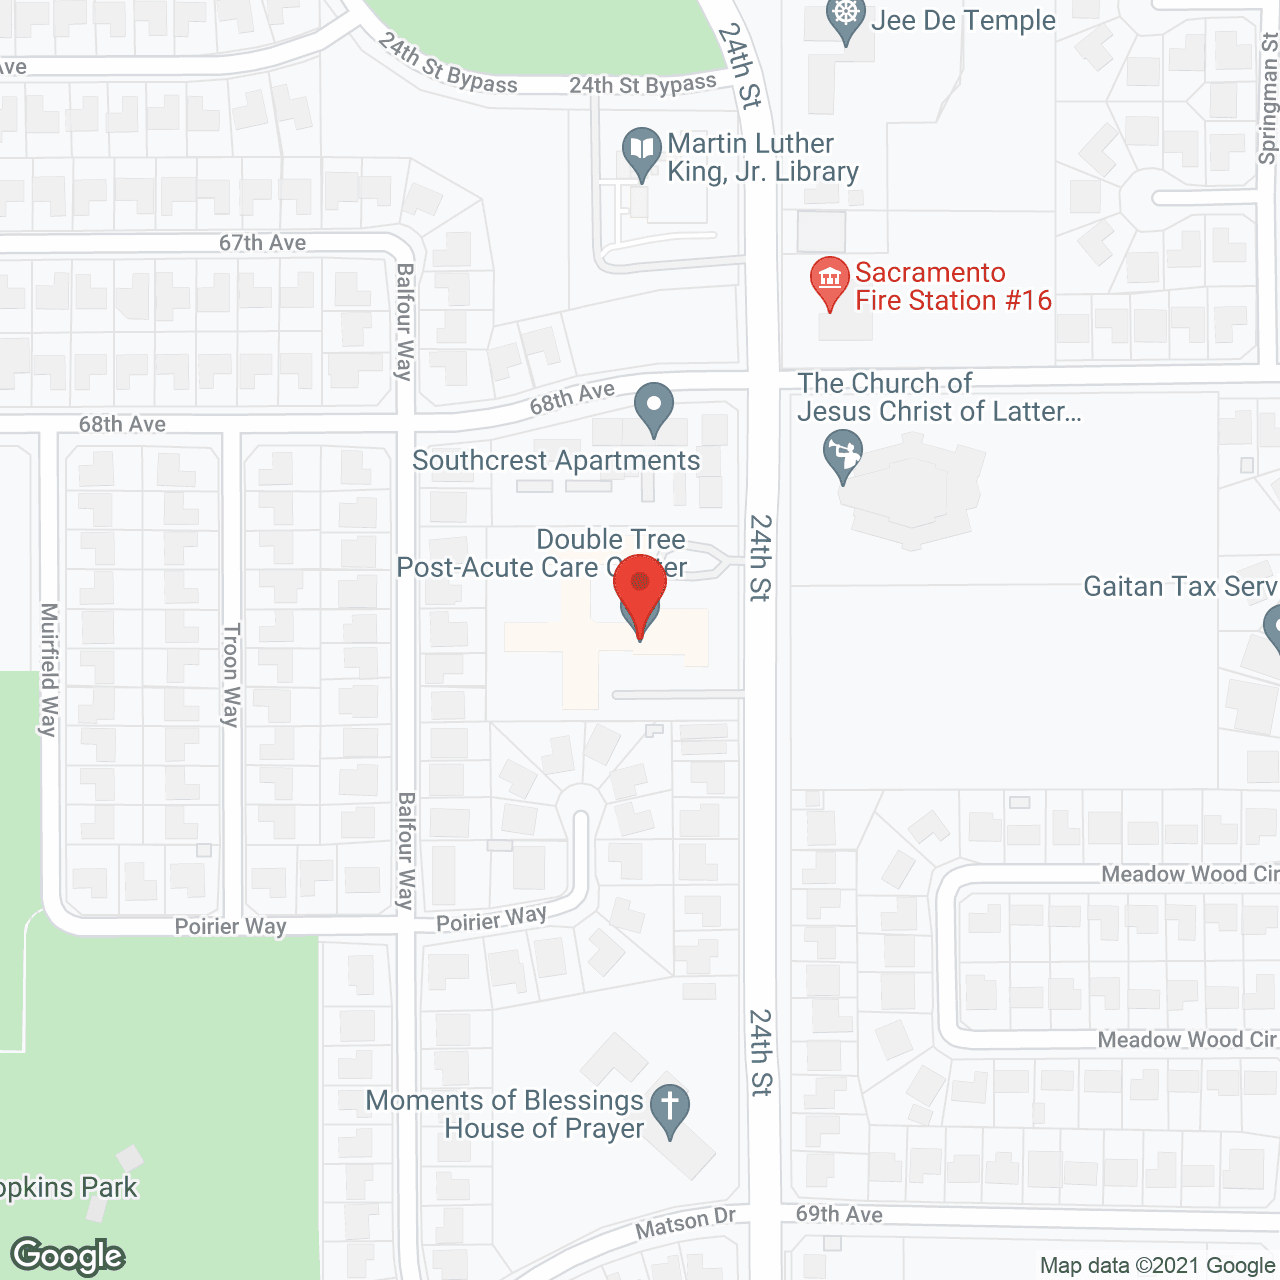 Double Tree Skilled Nursing in google map